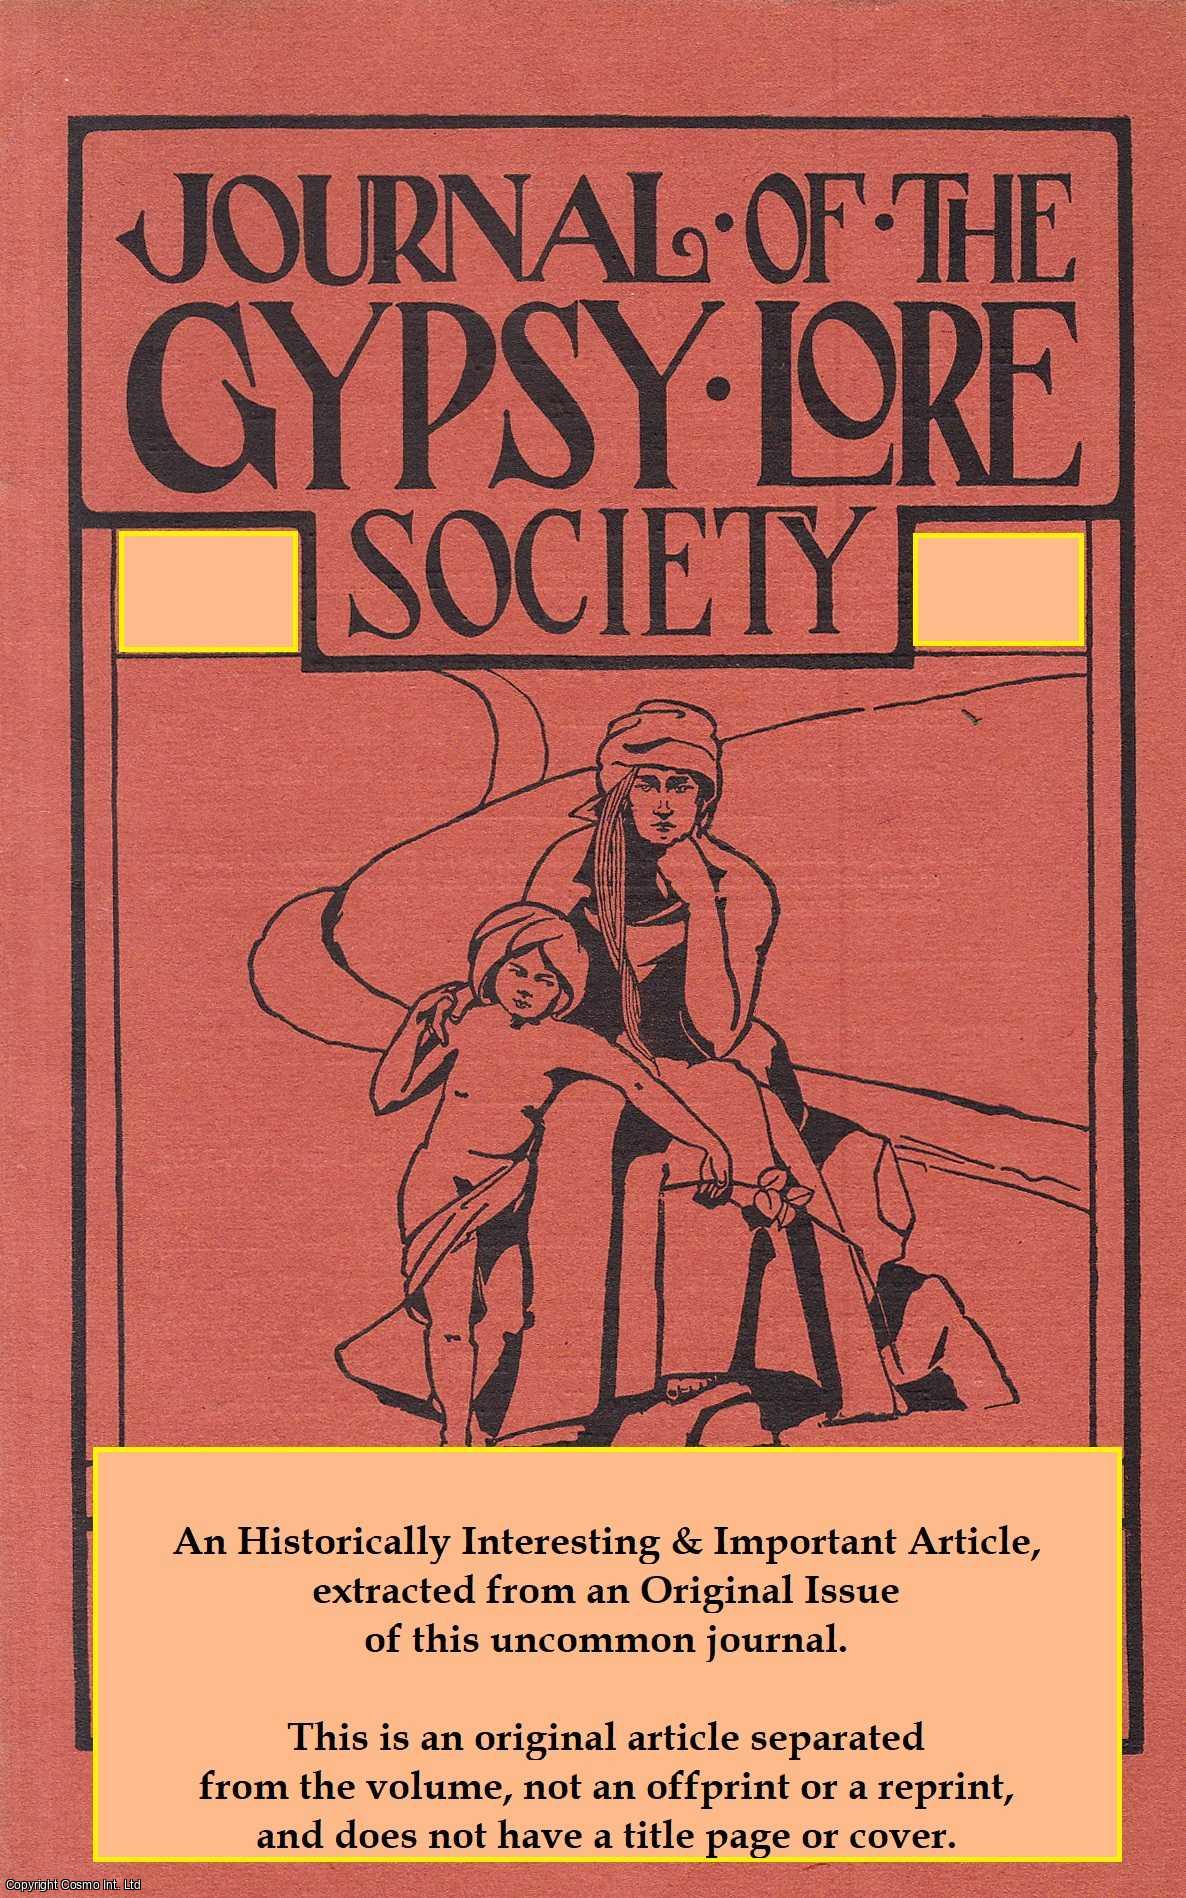 Thomas Acton - Meetings of the Social and War Crimes Commissions of the World Romani Congress, April 25-29, 1972: A Summary Report. An uncommon original article from the Journal of the Gypsy Lore Society, 1972.